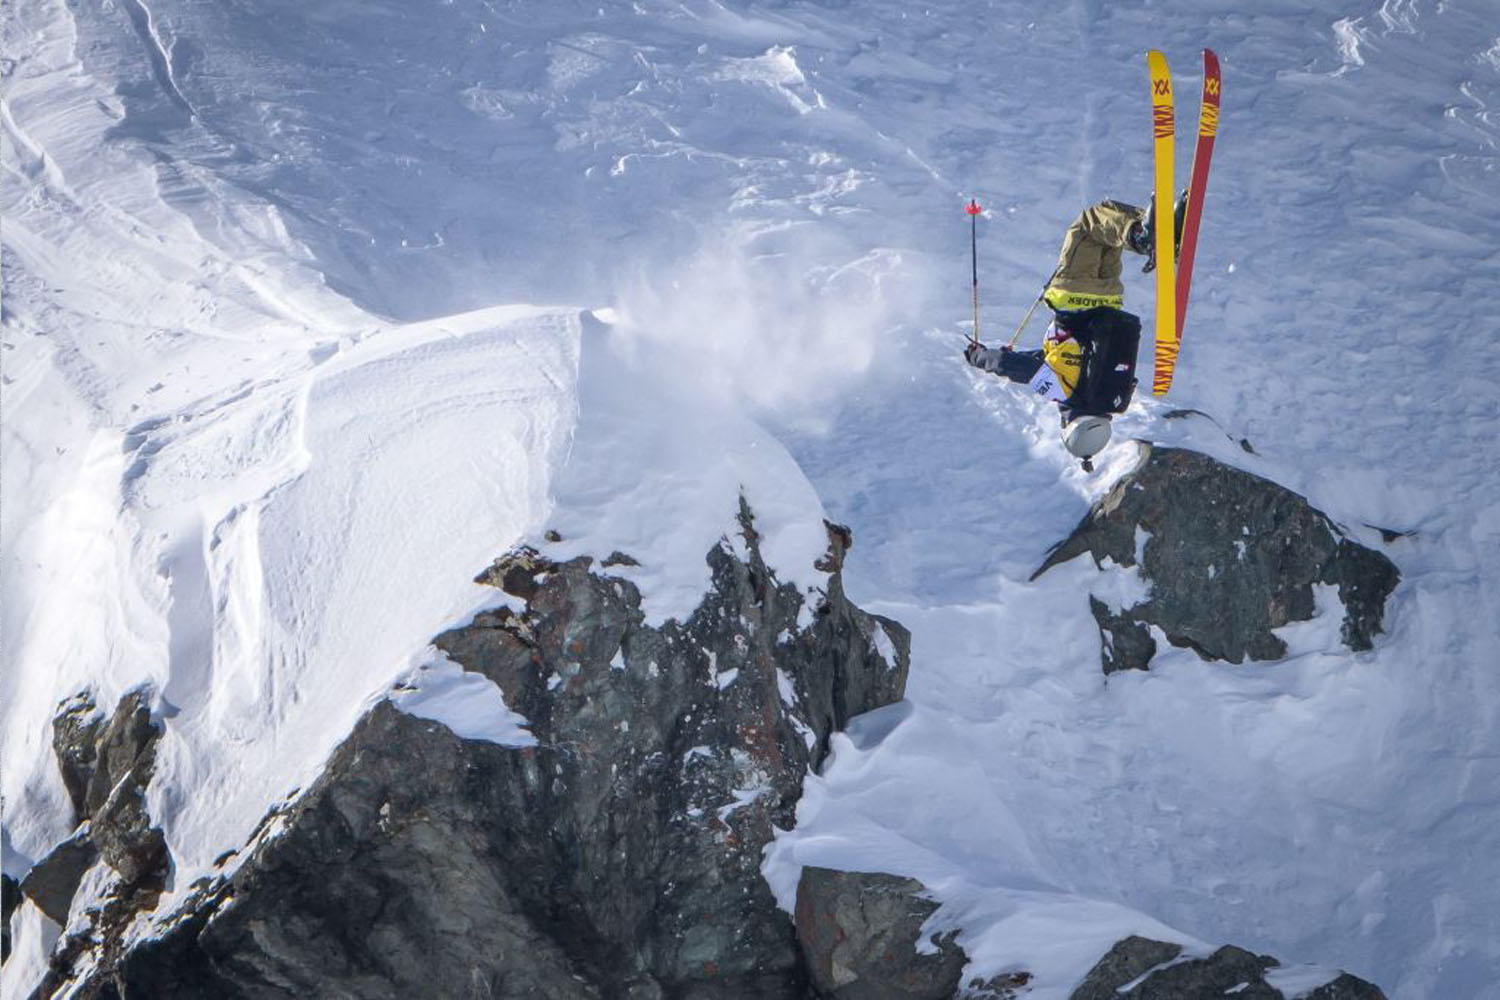 A Freeride World Tour competitor executes a backflip off a natural jump